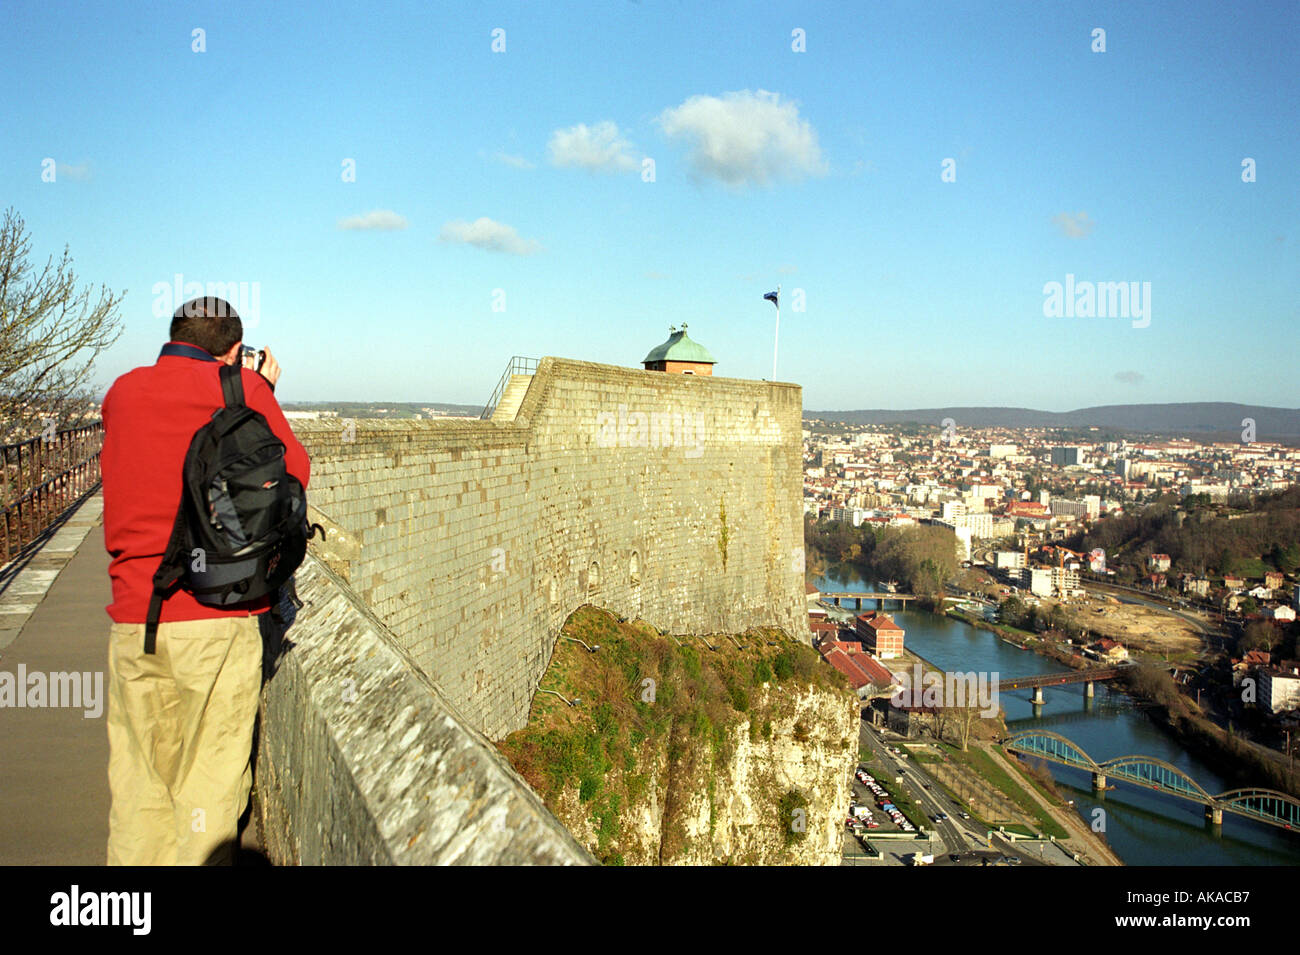 View from La Citadelle de Besancon or The Citadel of Besancon in the French Comte region of France Stock Photo